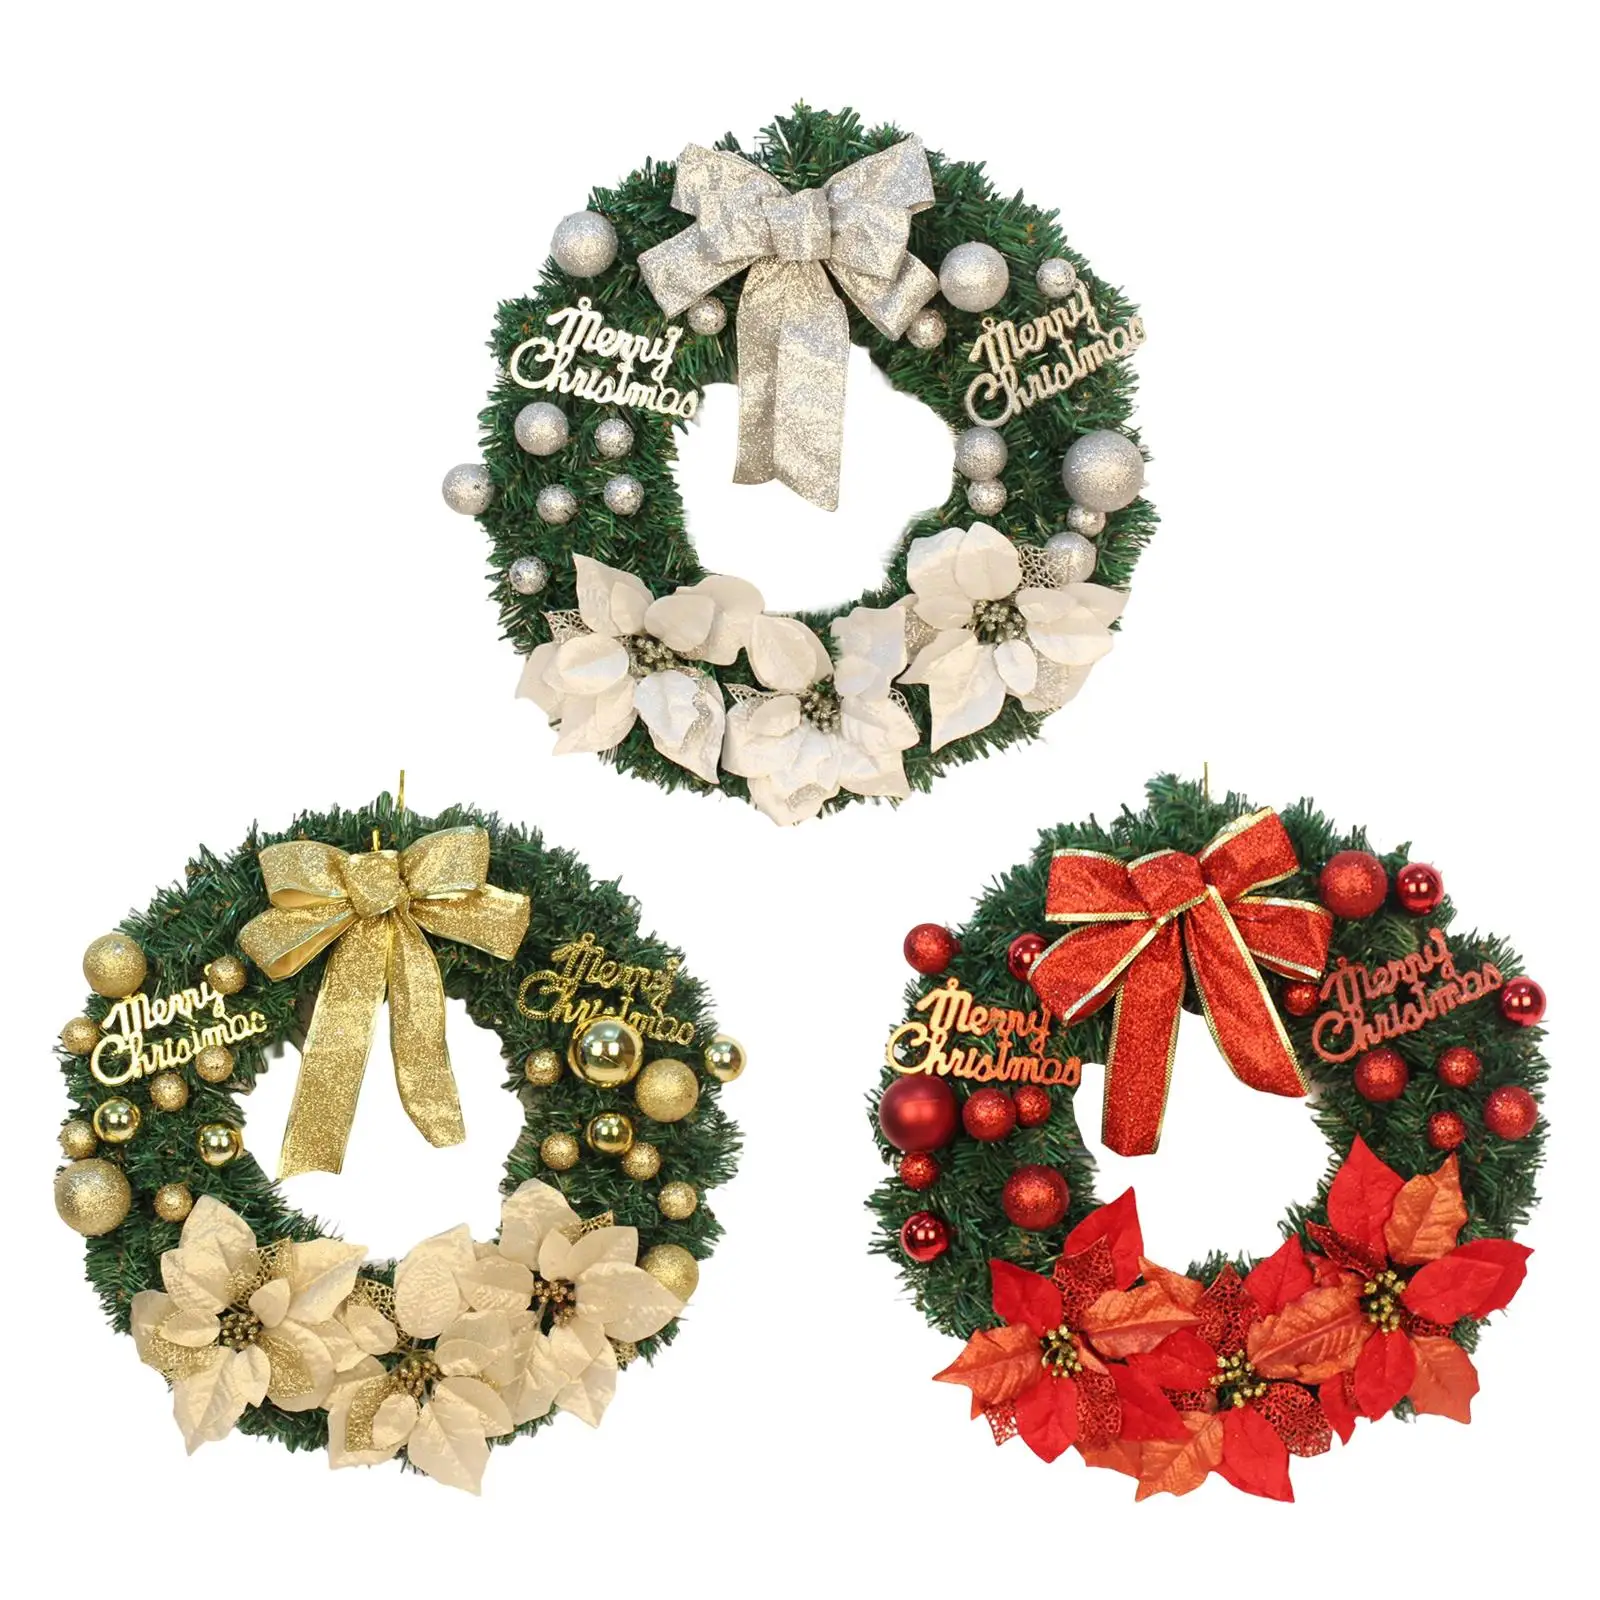 16 Inch Christmas Wreath with Balls Bow Ornaments Christmas Wreath Flower Wreath